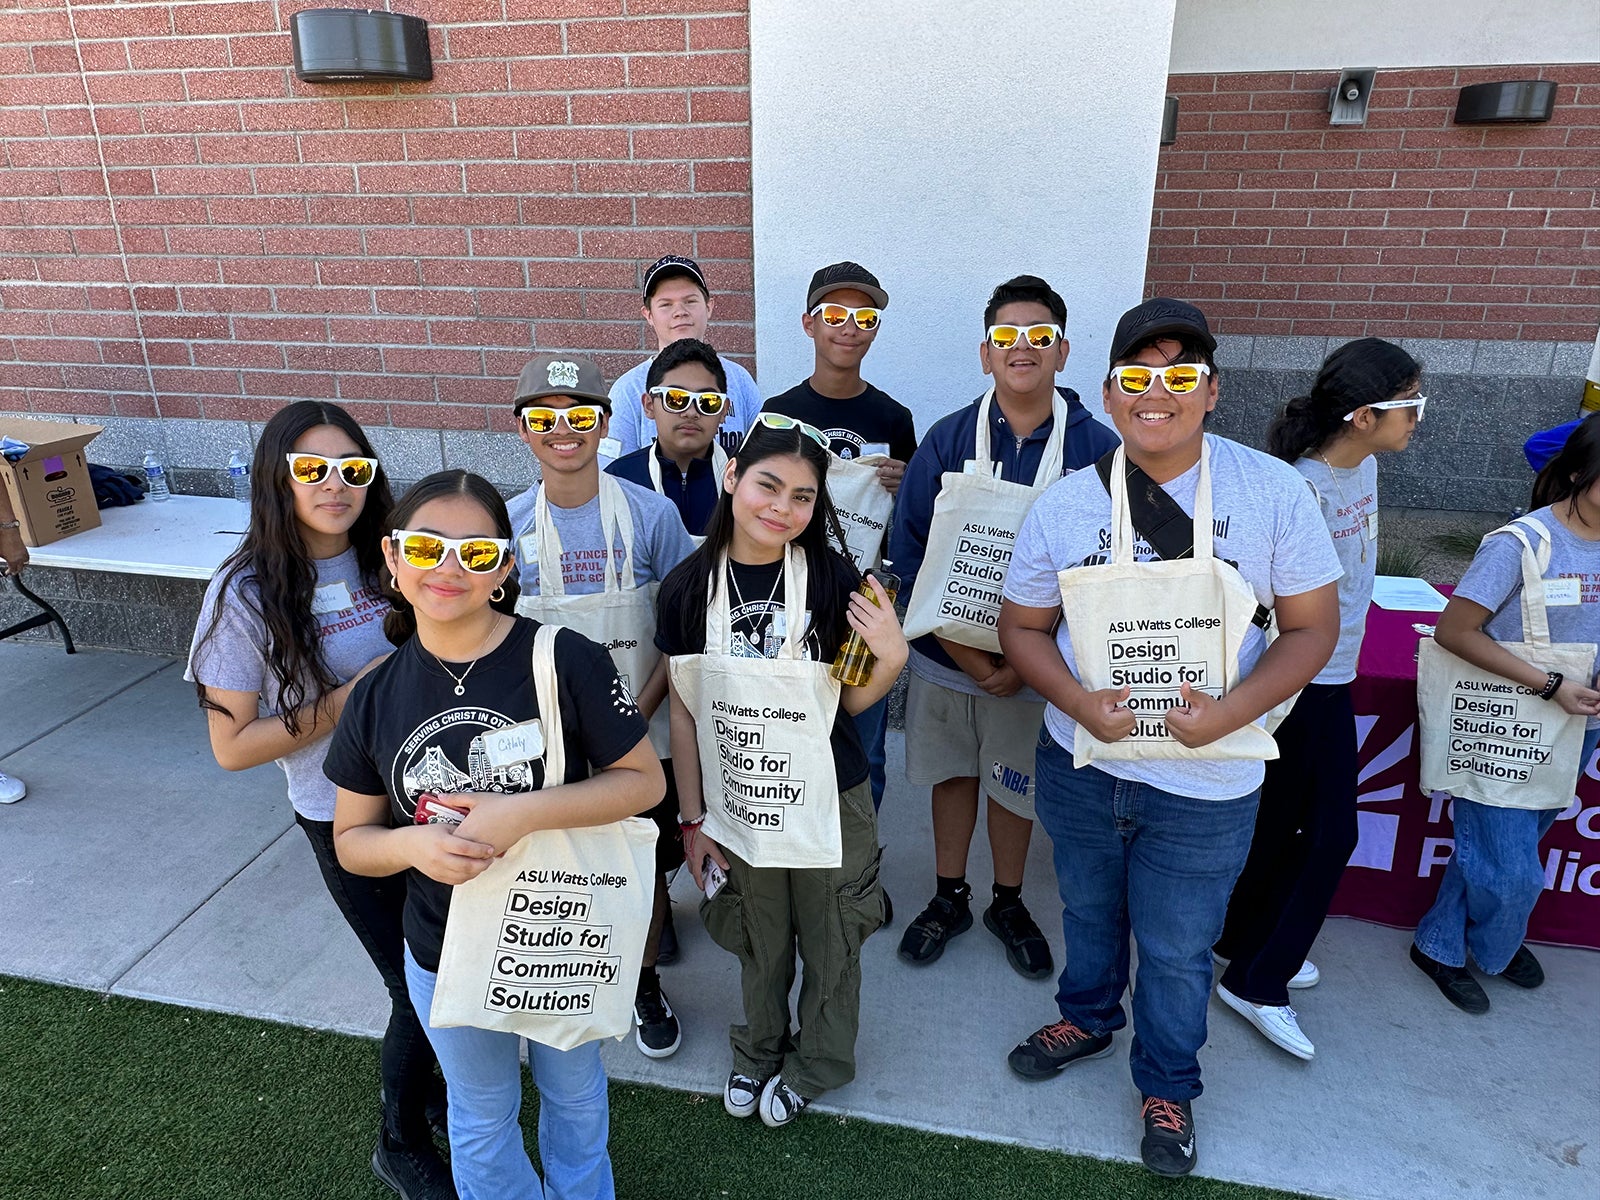 group of students smiling, wearing yellow-tinted sunglasses, and holding "Design Studio for Community Solutions" tote bags 